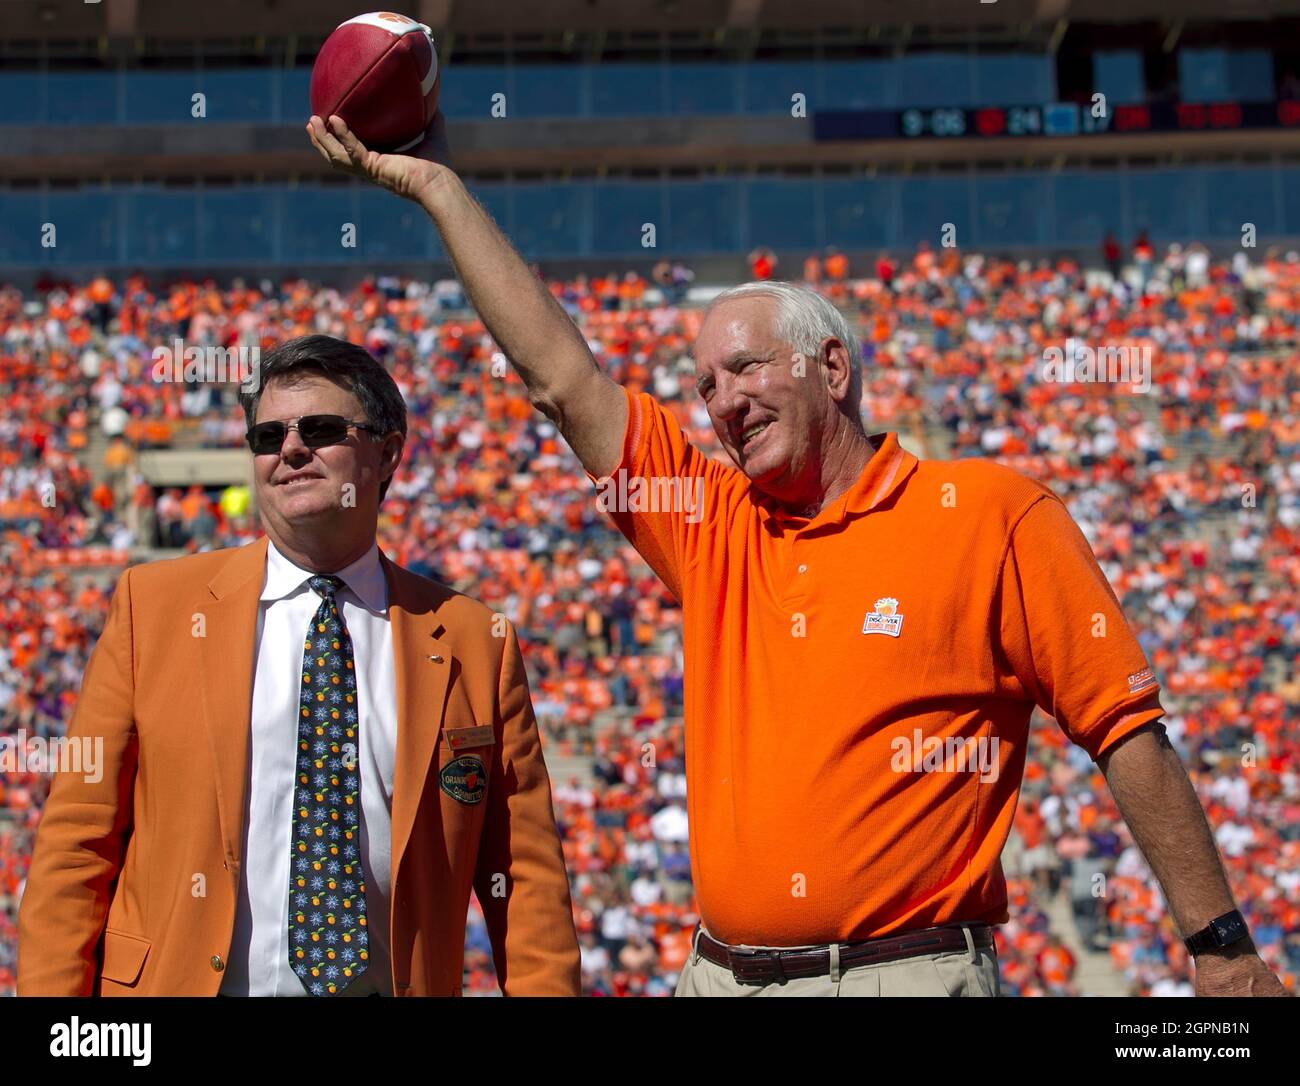 Clemson, USA. 21st Oct, 2011. Former Clemson coach Danny Ford acknowledges fans after his 1981 National Championship team was honored at halftime of the Tigers' game against North Carolina. The Clemson Tigers defeated the North Carolina Tar Heels, 59-38, at Memorial Stadium in Clemson, South Carolina, on Saturday, Oct. 22, 2011. (Photo by Robert Willett/Raleigh News & Observer/TNS/Sipa USA) Credit: Sipa USA/Alamy Live News Stock Photo